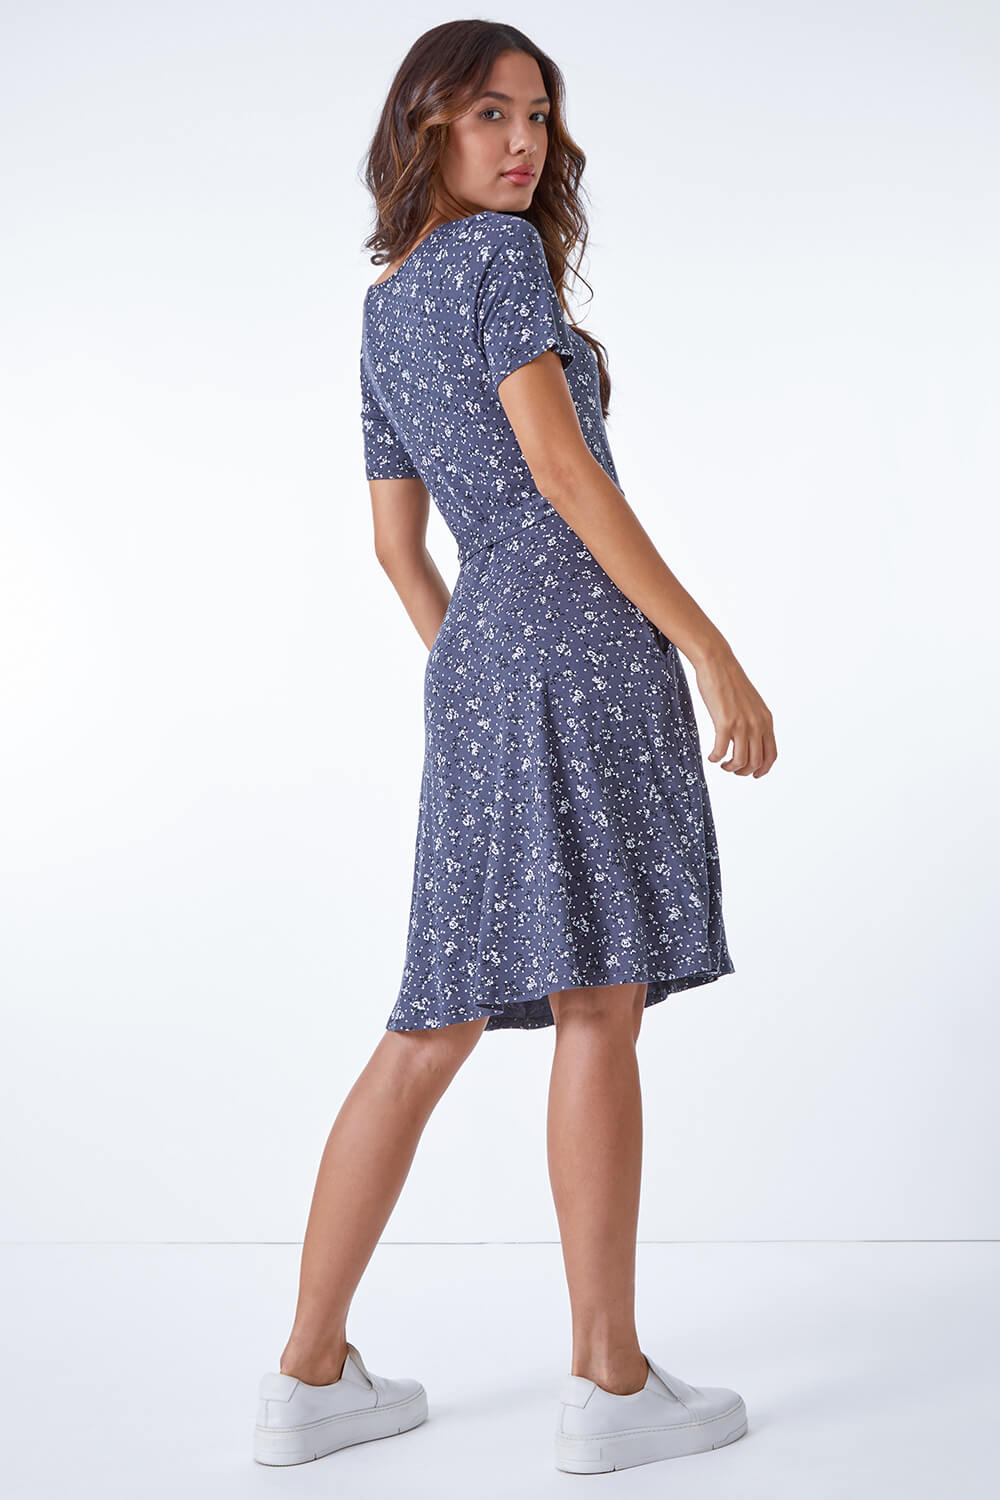 Dark Grey Ditsy Floral Fit & Flare Dress, Image 3 of 5